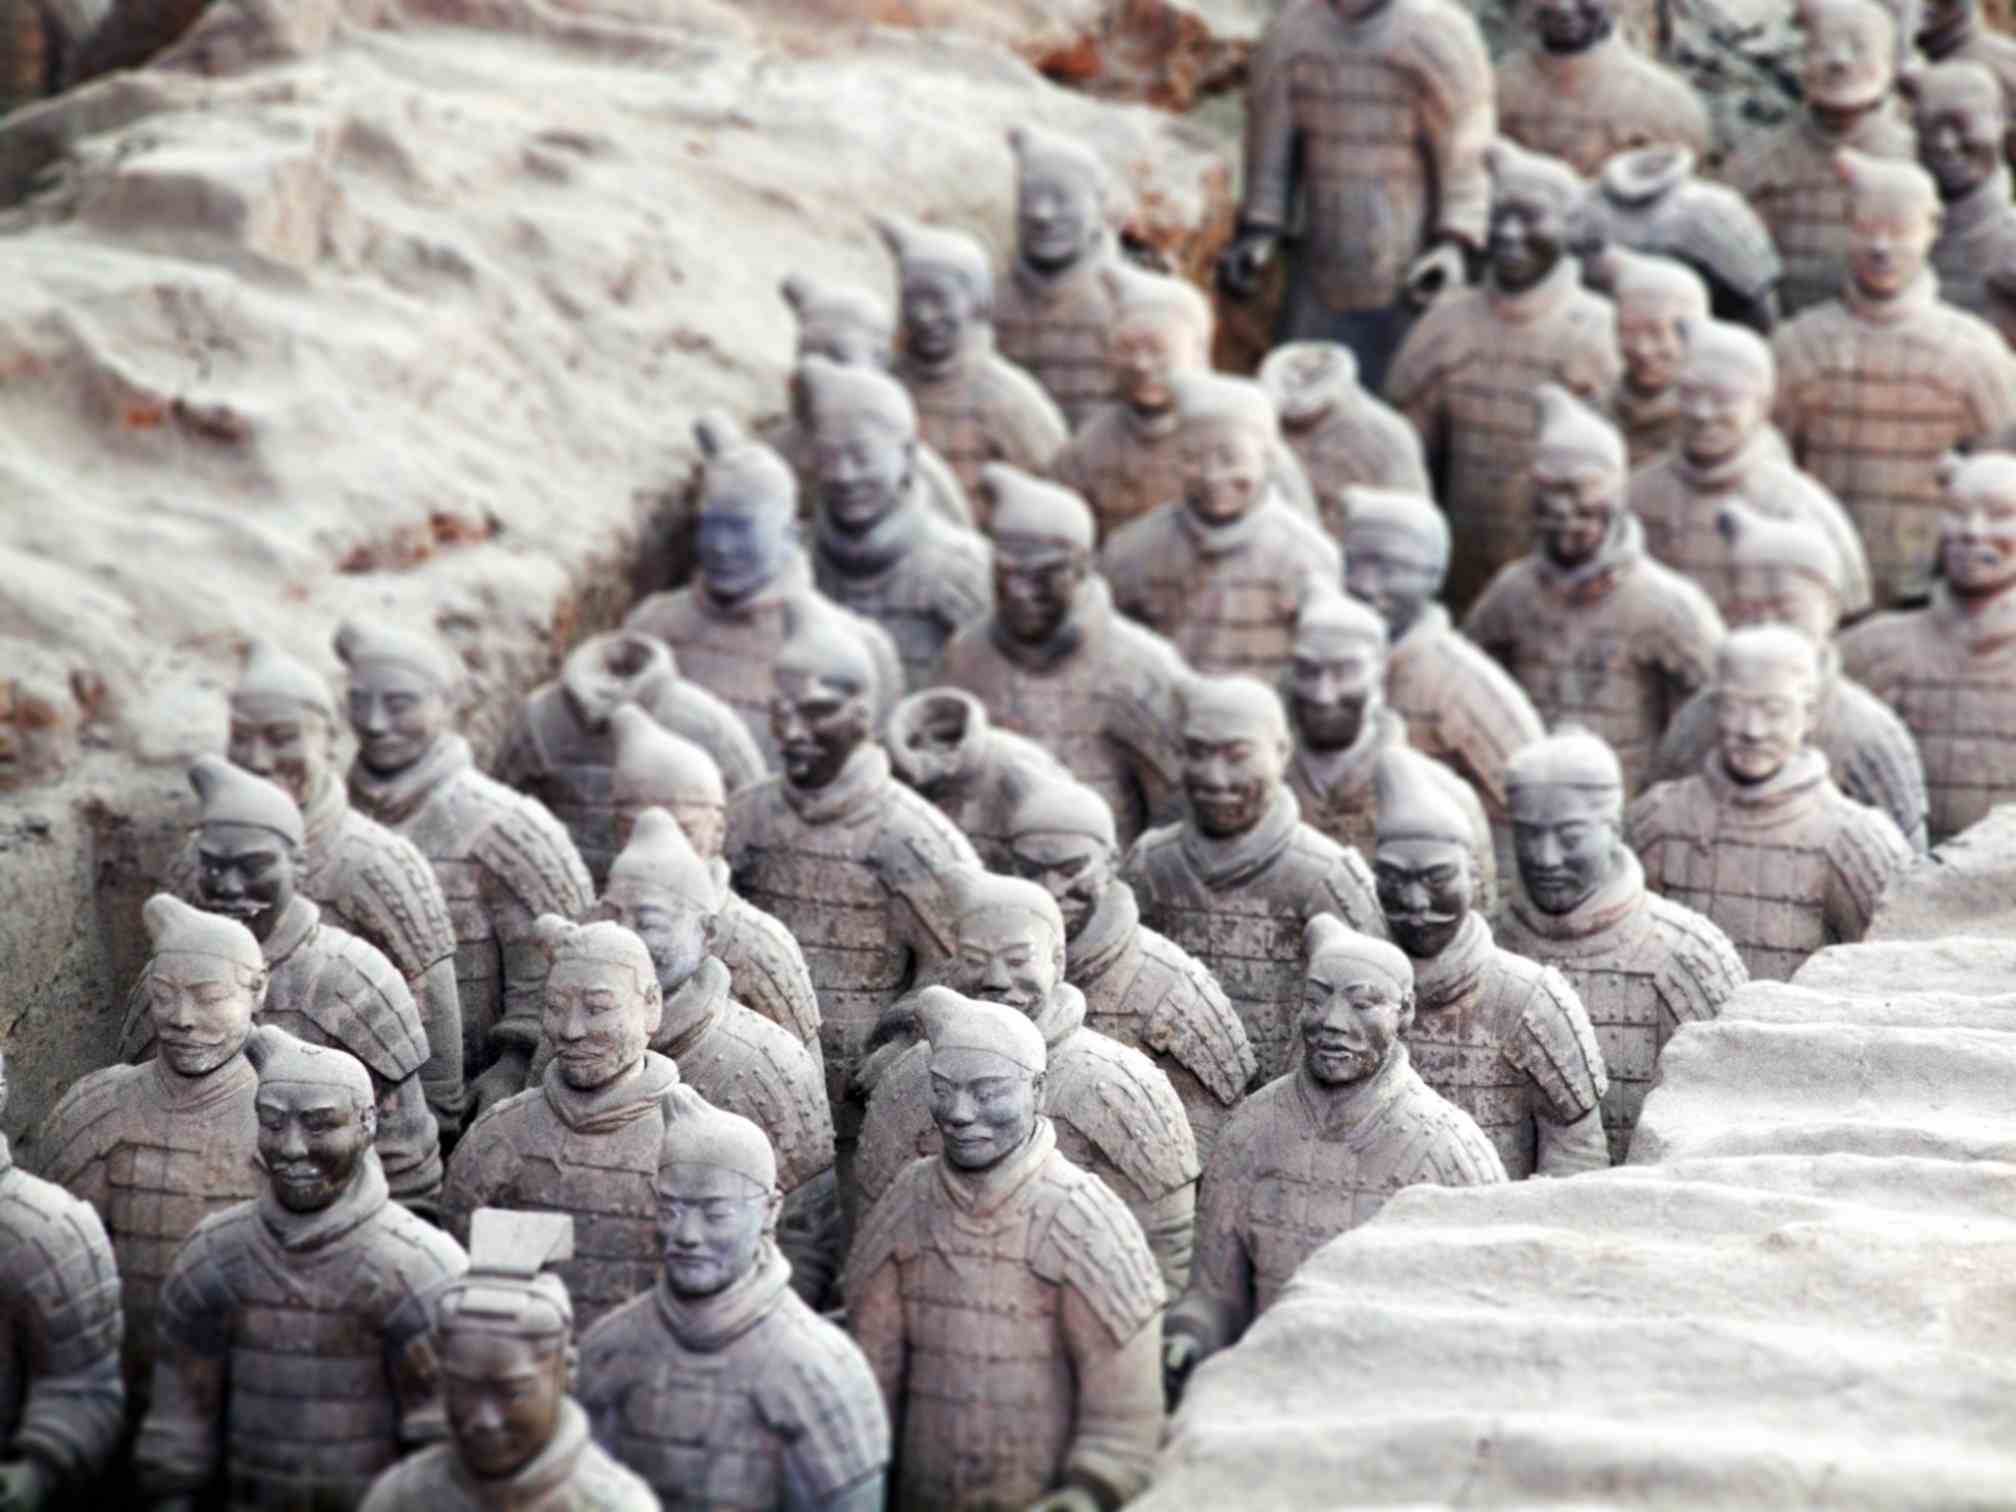 Emperor Qin's terracotta warriors – An army for the afterlife 2